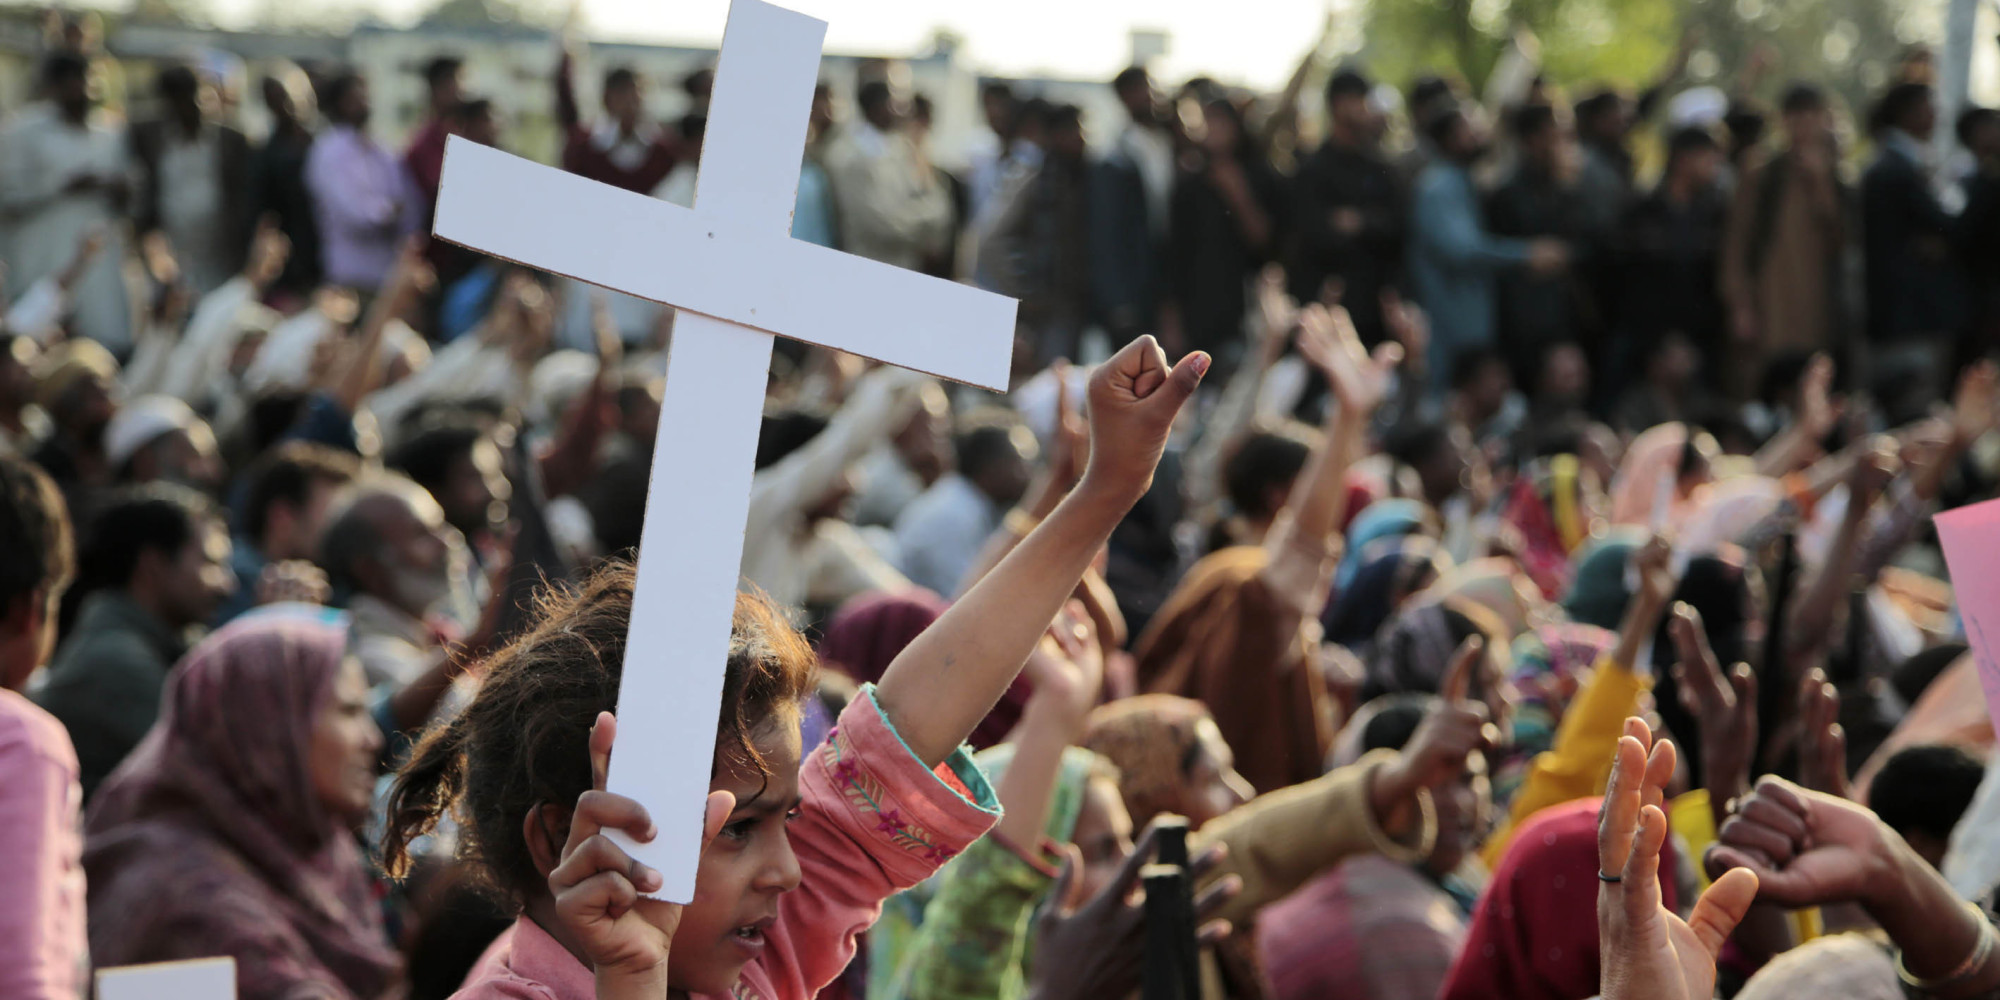 A municipal government in the Punjab province of Pakistan has destroyed the homes of 13 Christian families after they refused to become bonded laborers and work without pay.